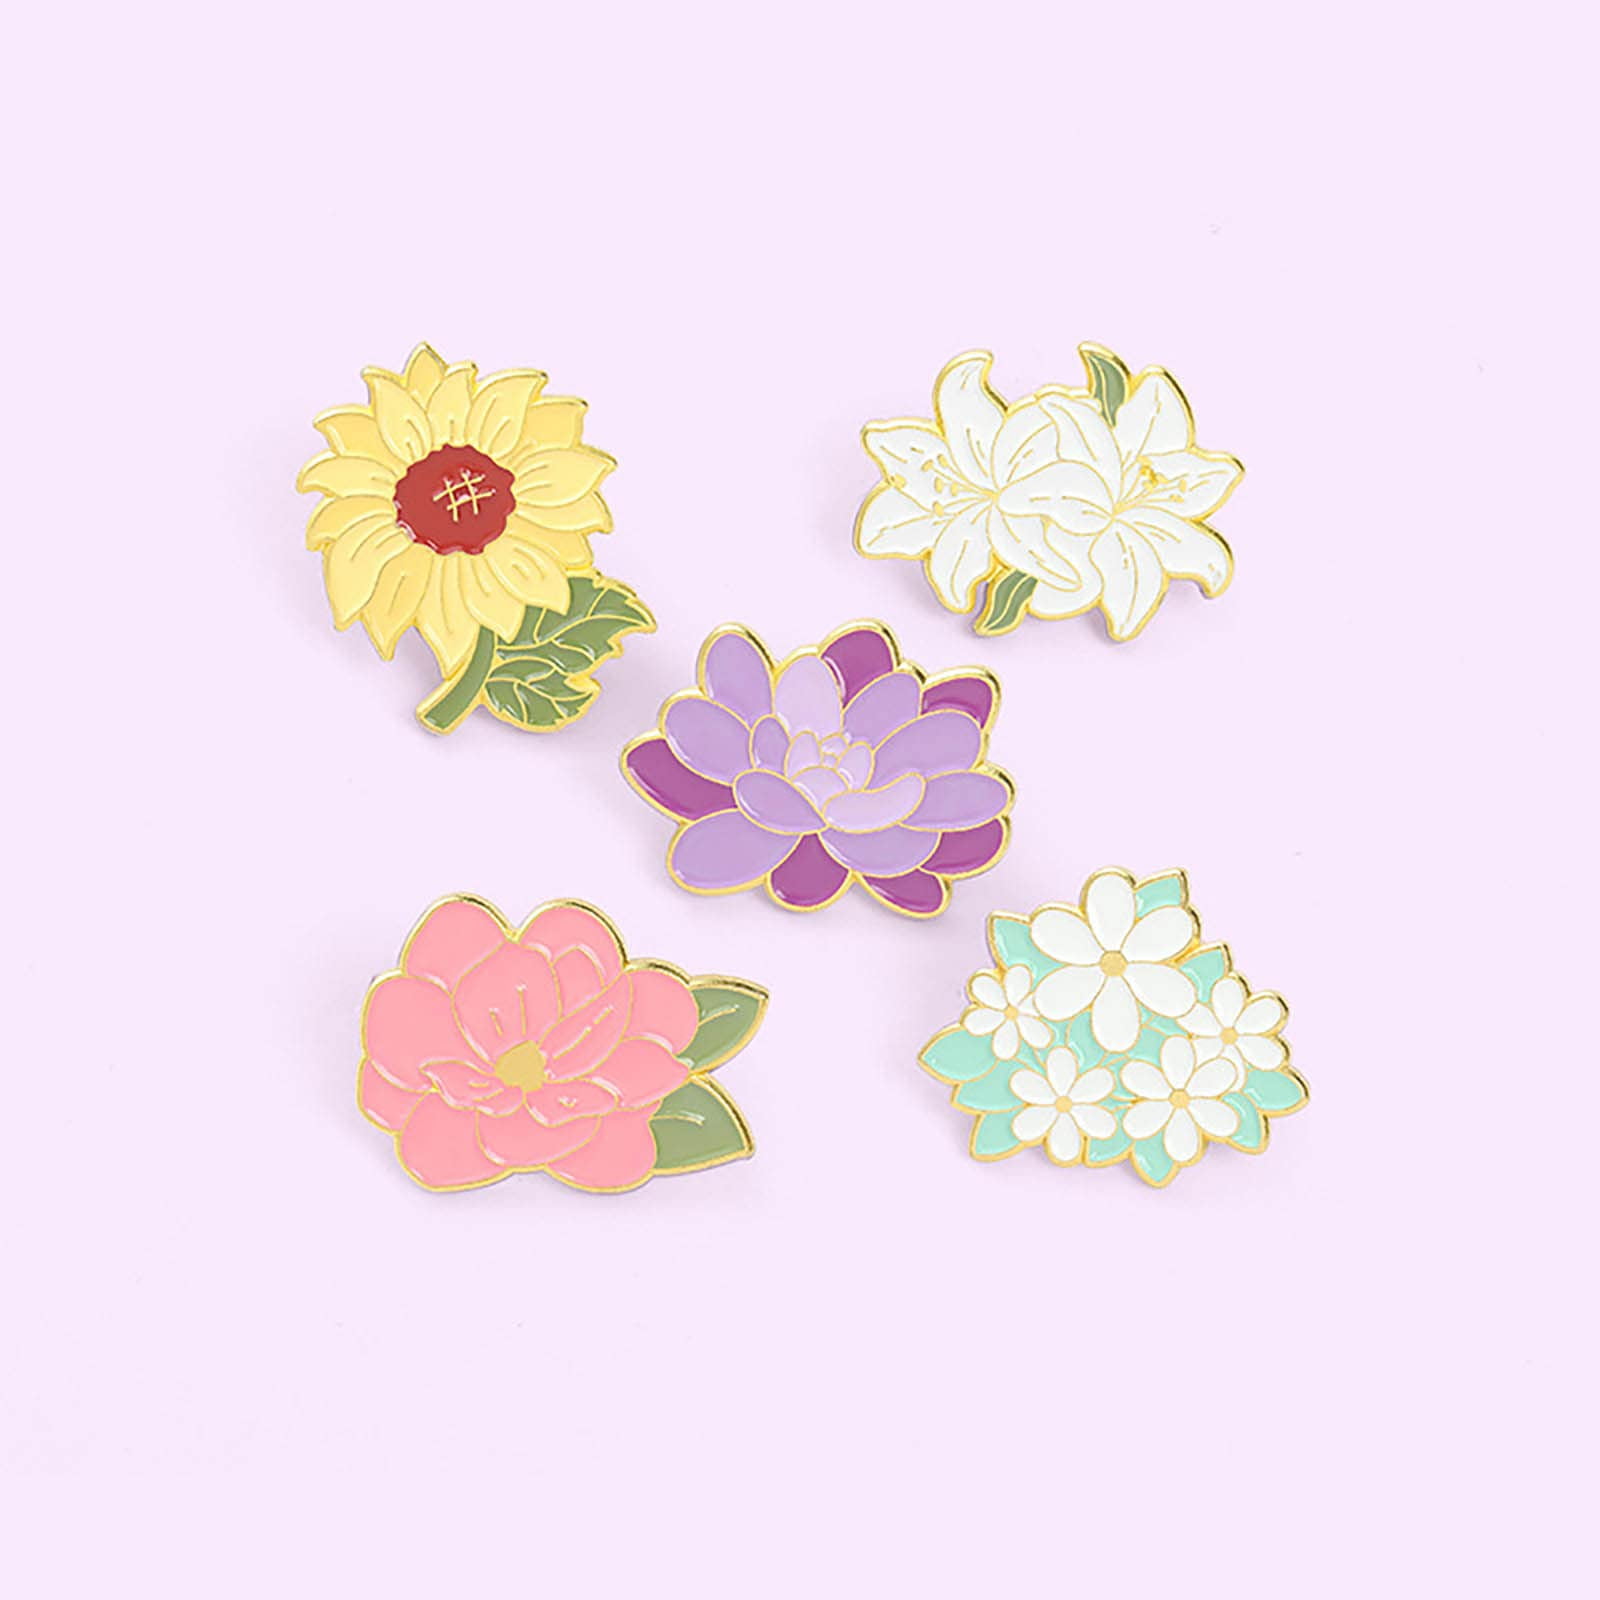 Junkin 10 Pieces Pin Brooches Cute Floral Kawaii Pins Flask Test Tube Backpack Pins Aesthetic Spring Flower Plant Pins Set for Jackets Lapel Scientist Pins